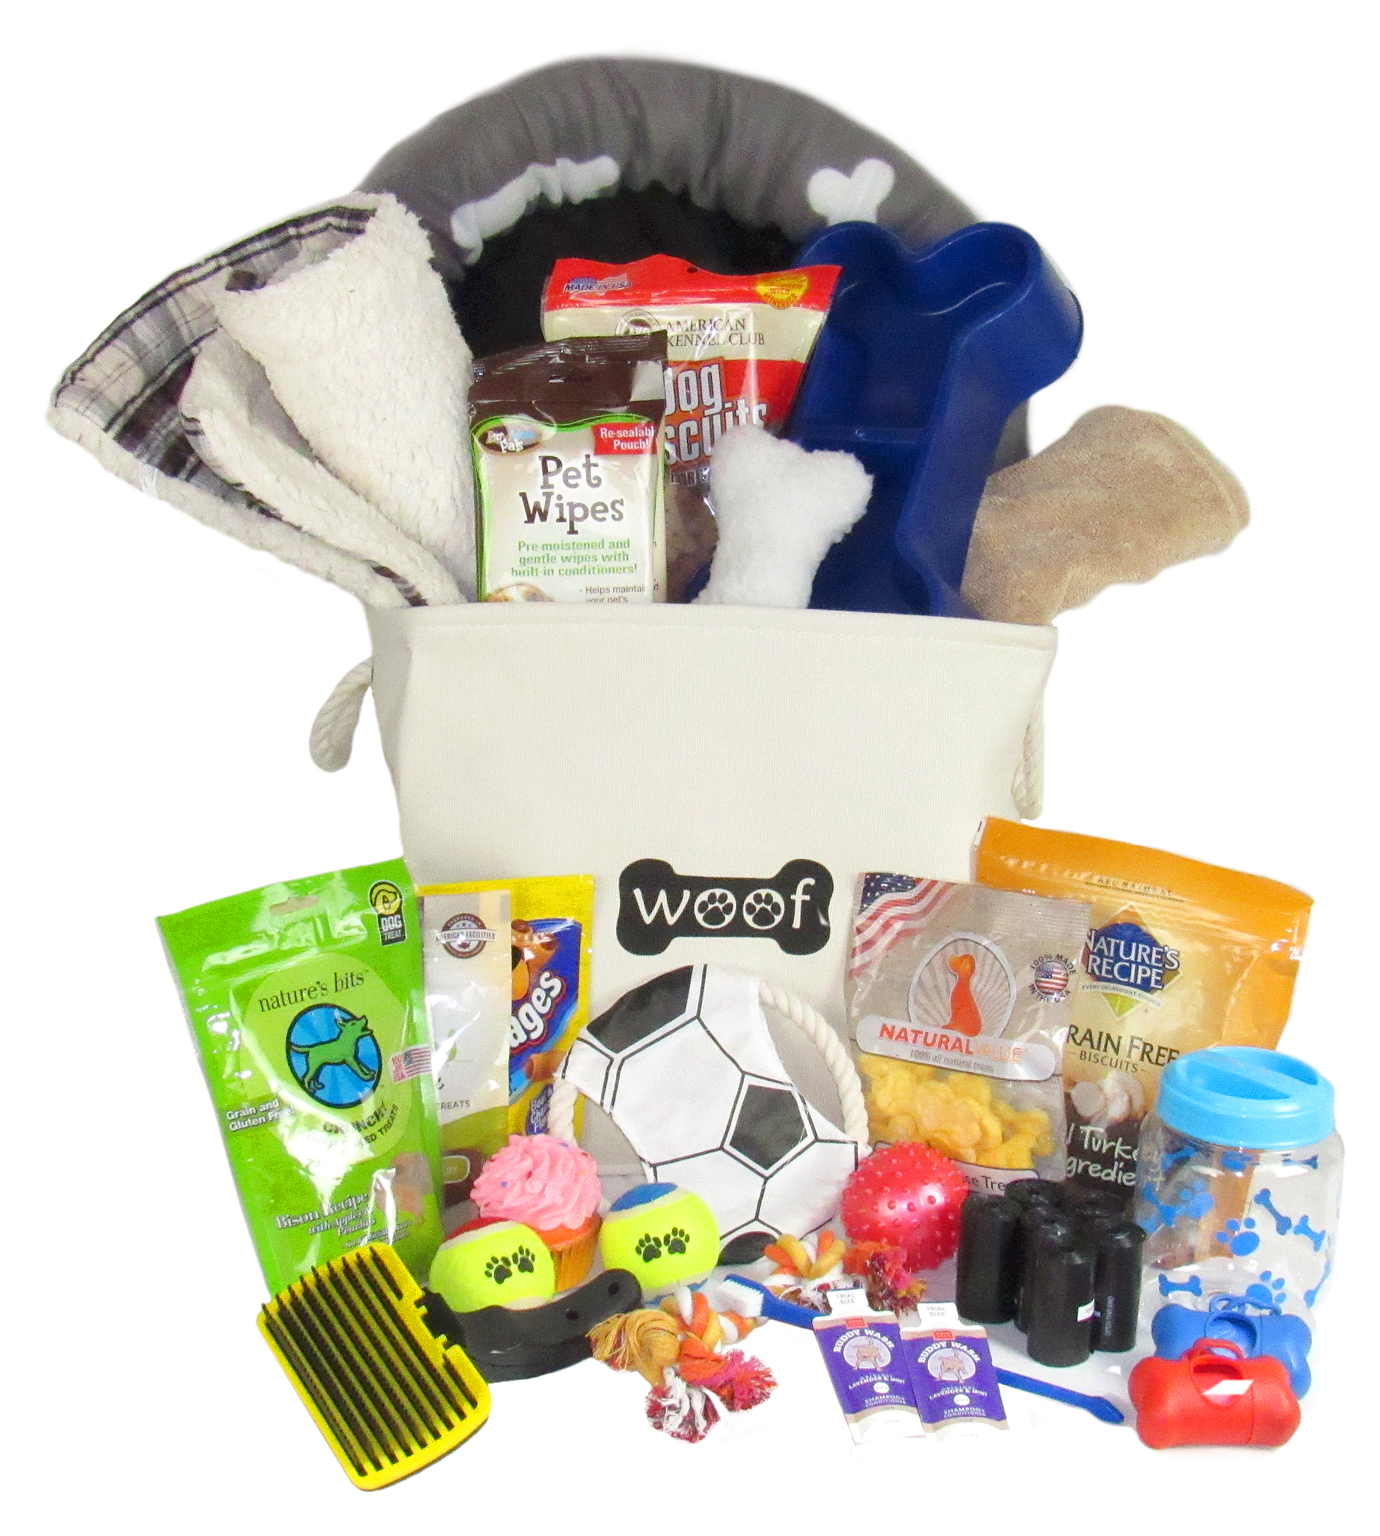 Our Spoiled Rotten Mutt Gift Basket